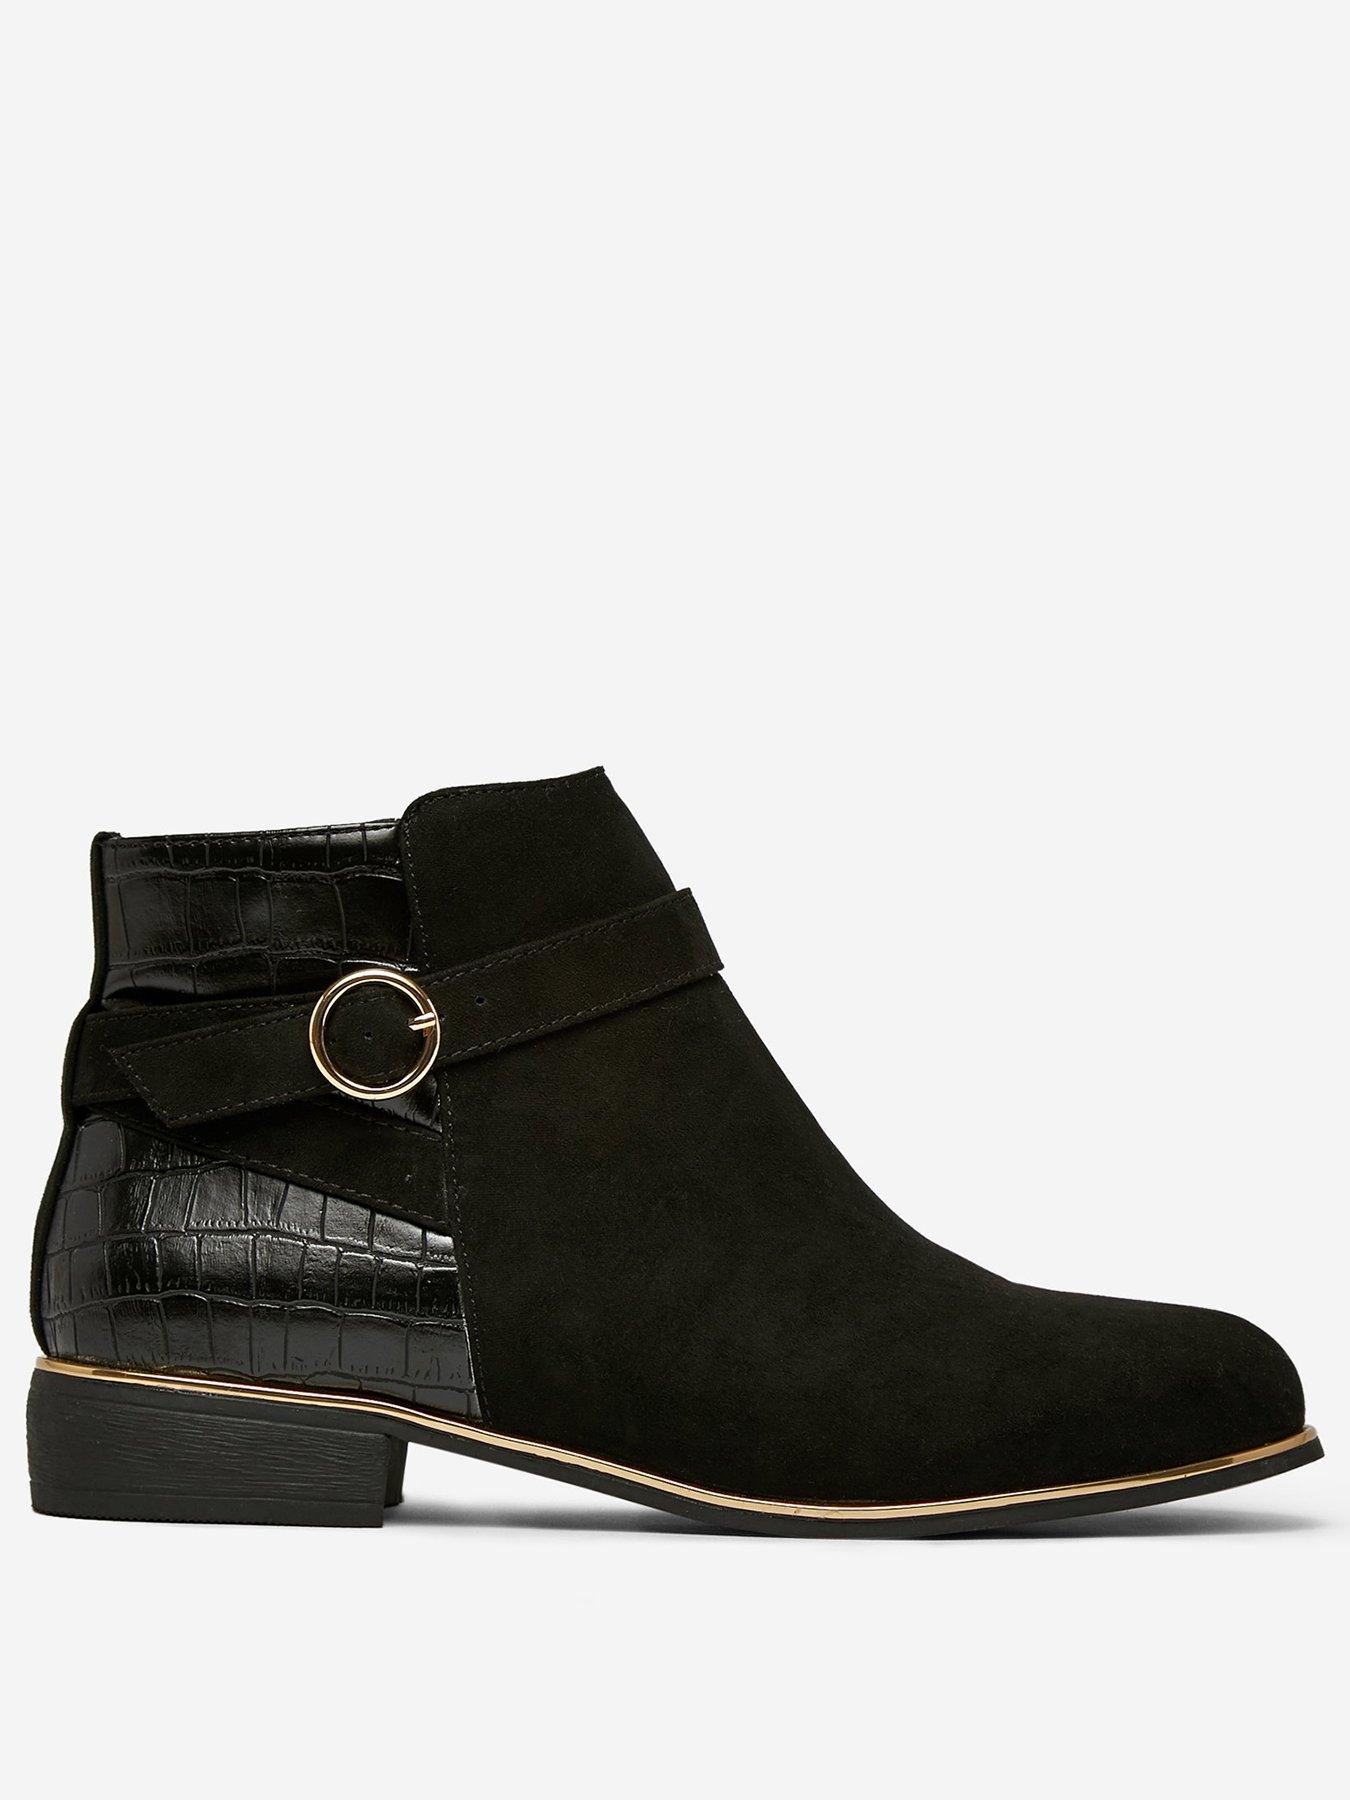 dorothy perkins ankle boots